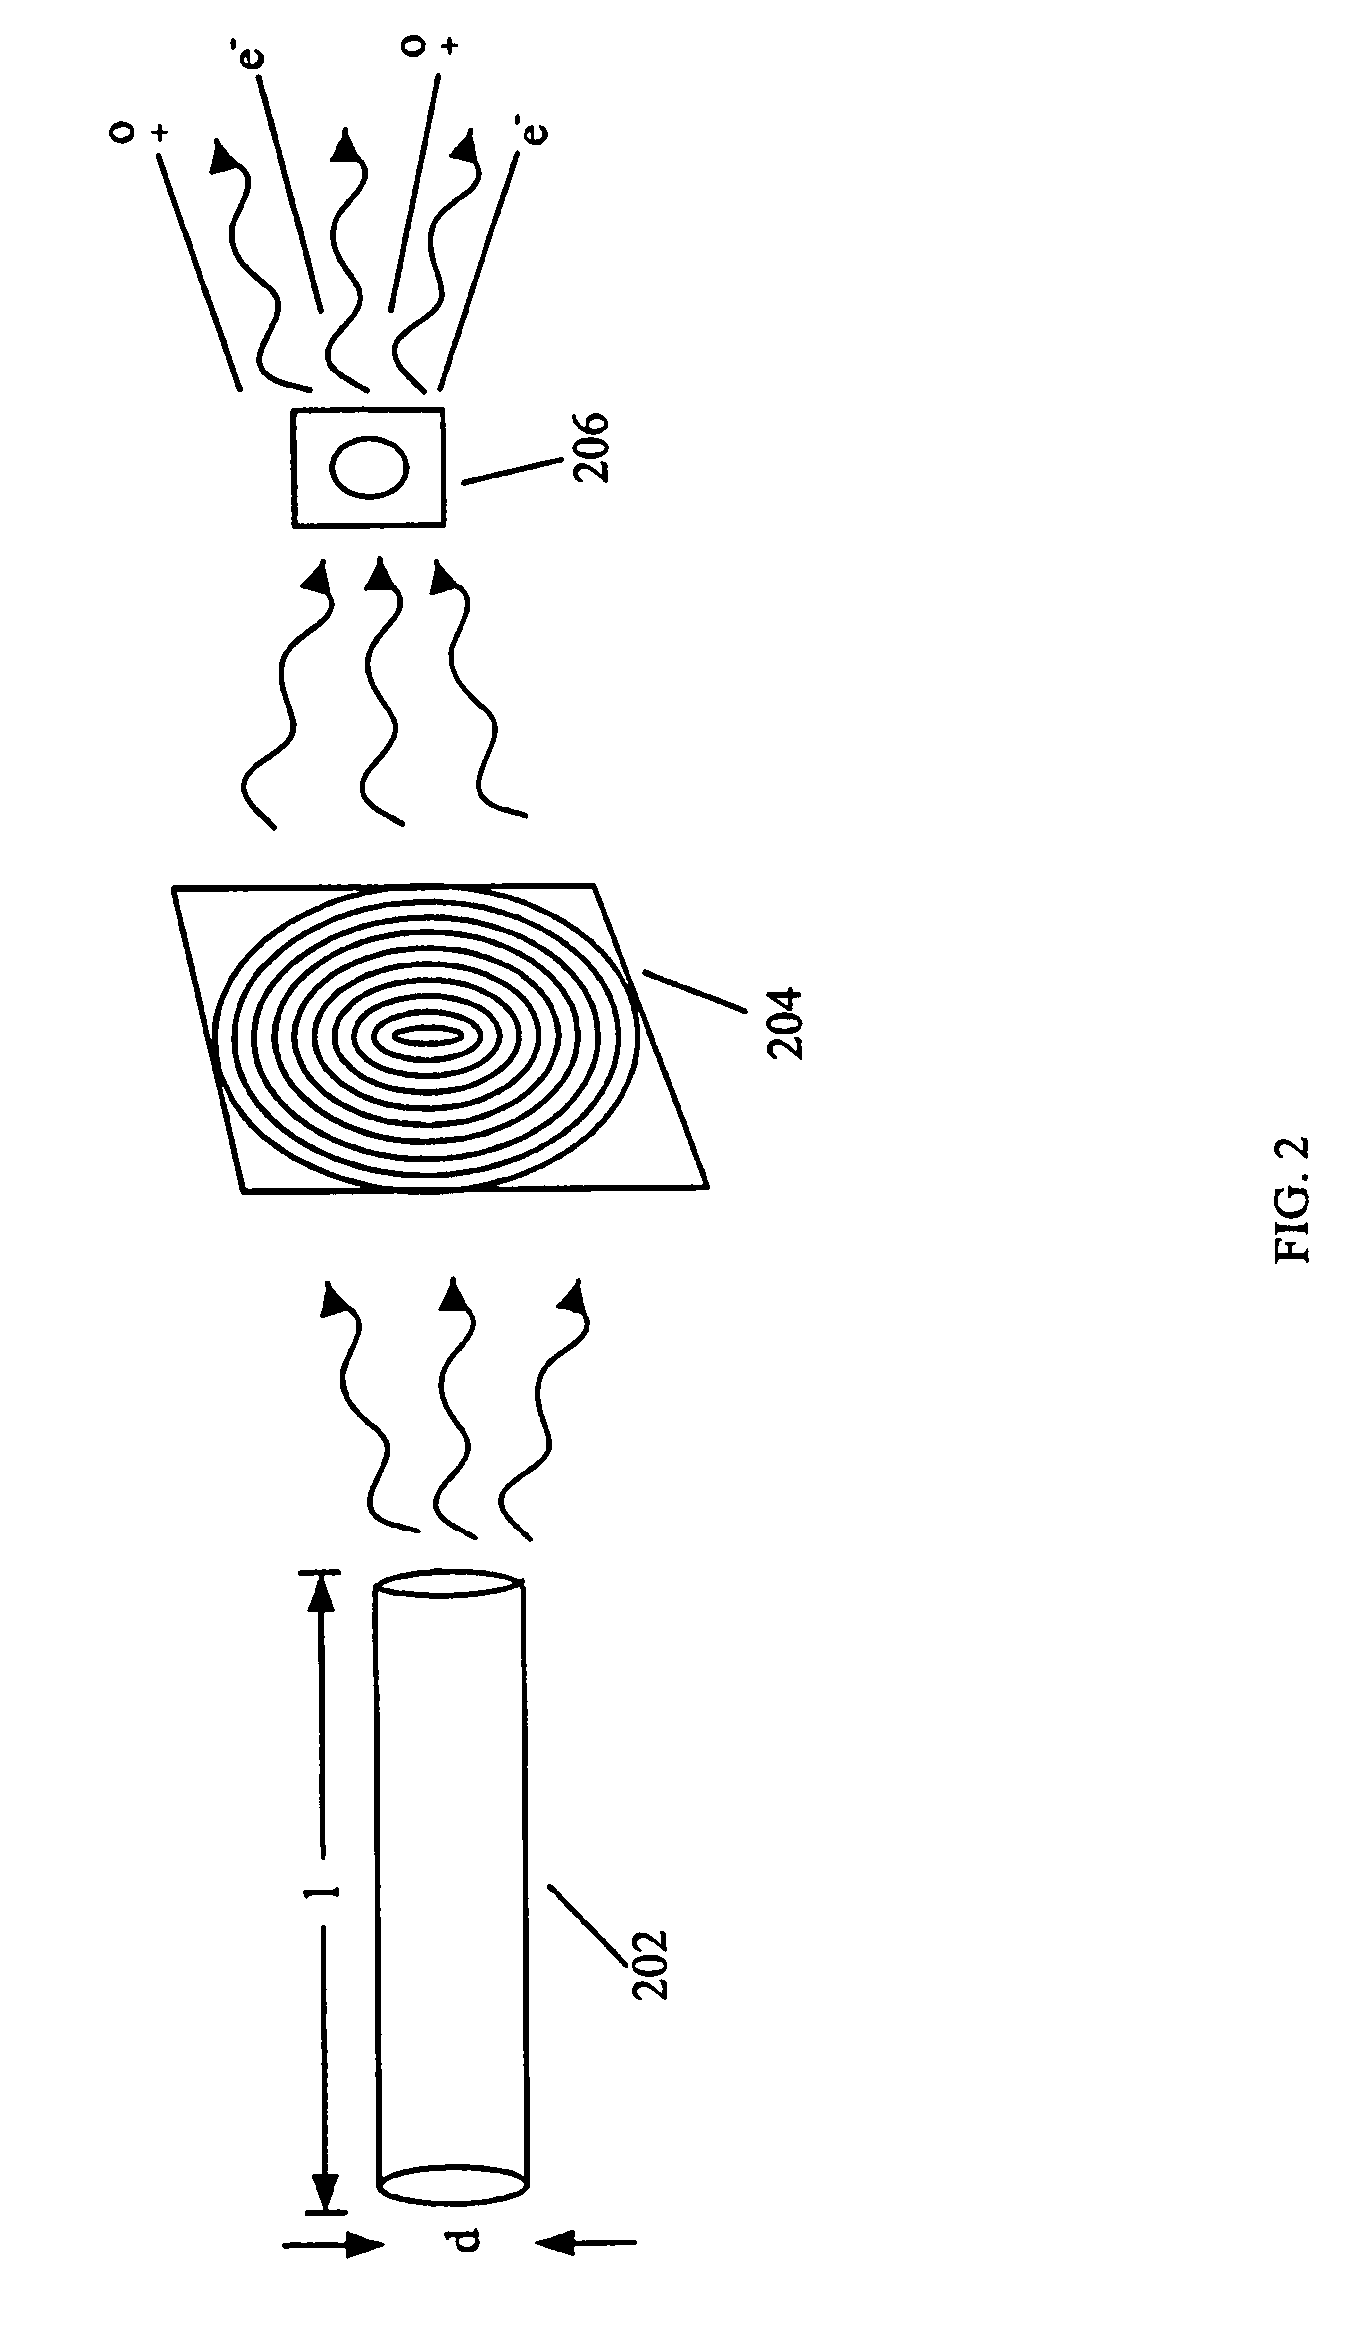 Systems and methods for achieving a required spot says for nanoscale surface analysis using soft x-rays